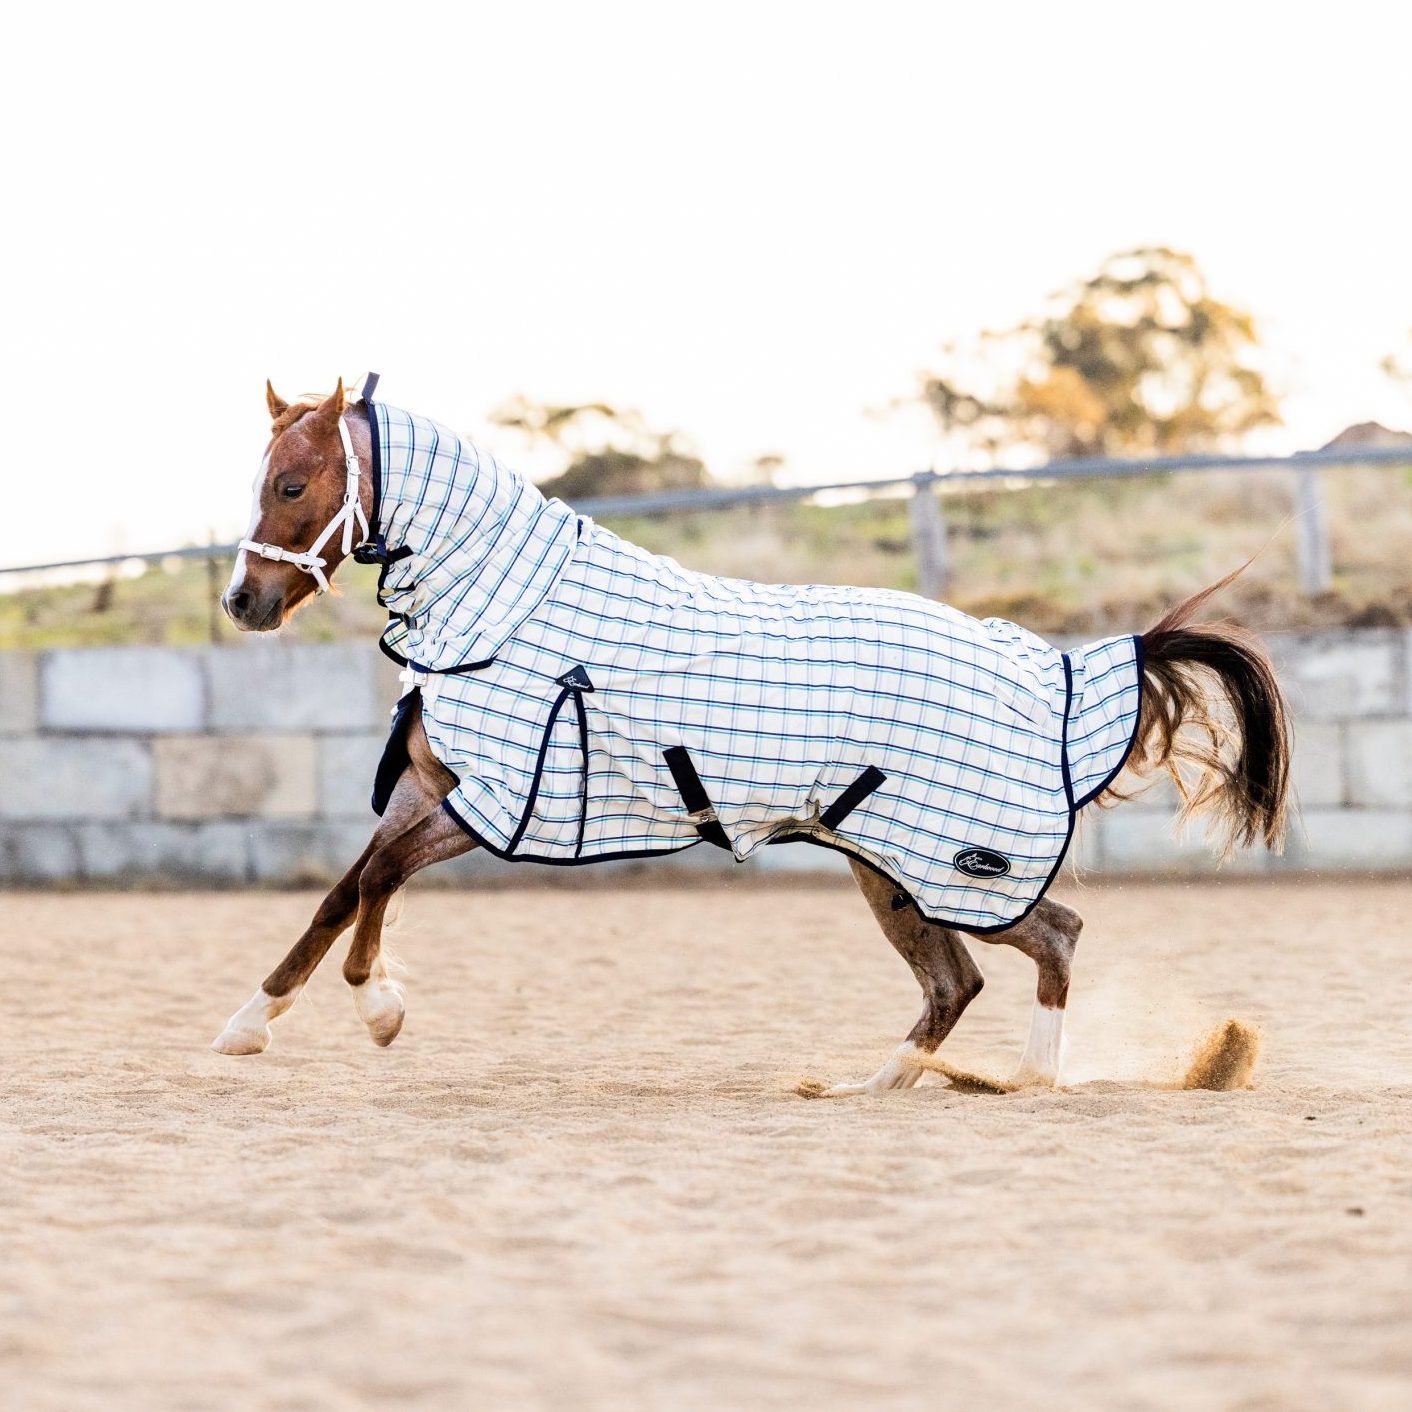 Case Study: Scaling with Earlwood Equine, an Extra $33k in Sales in one Month